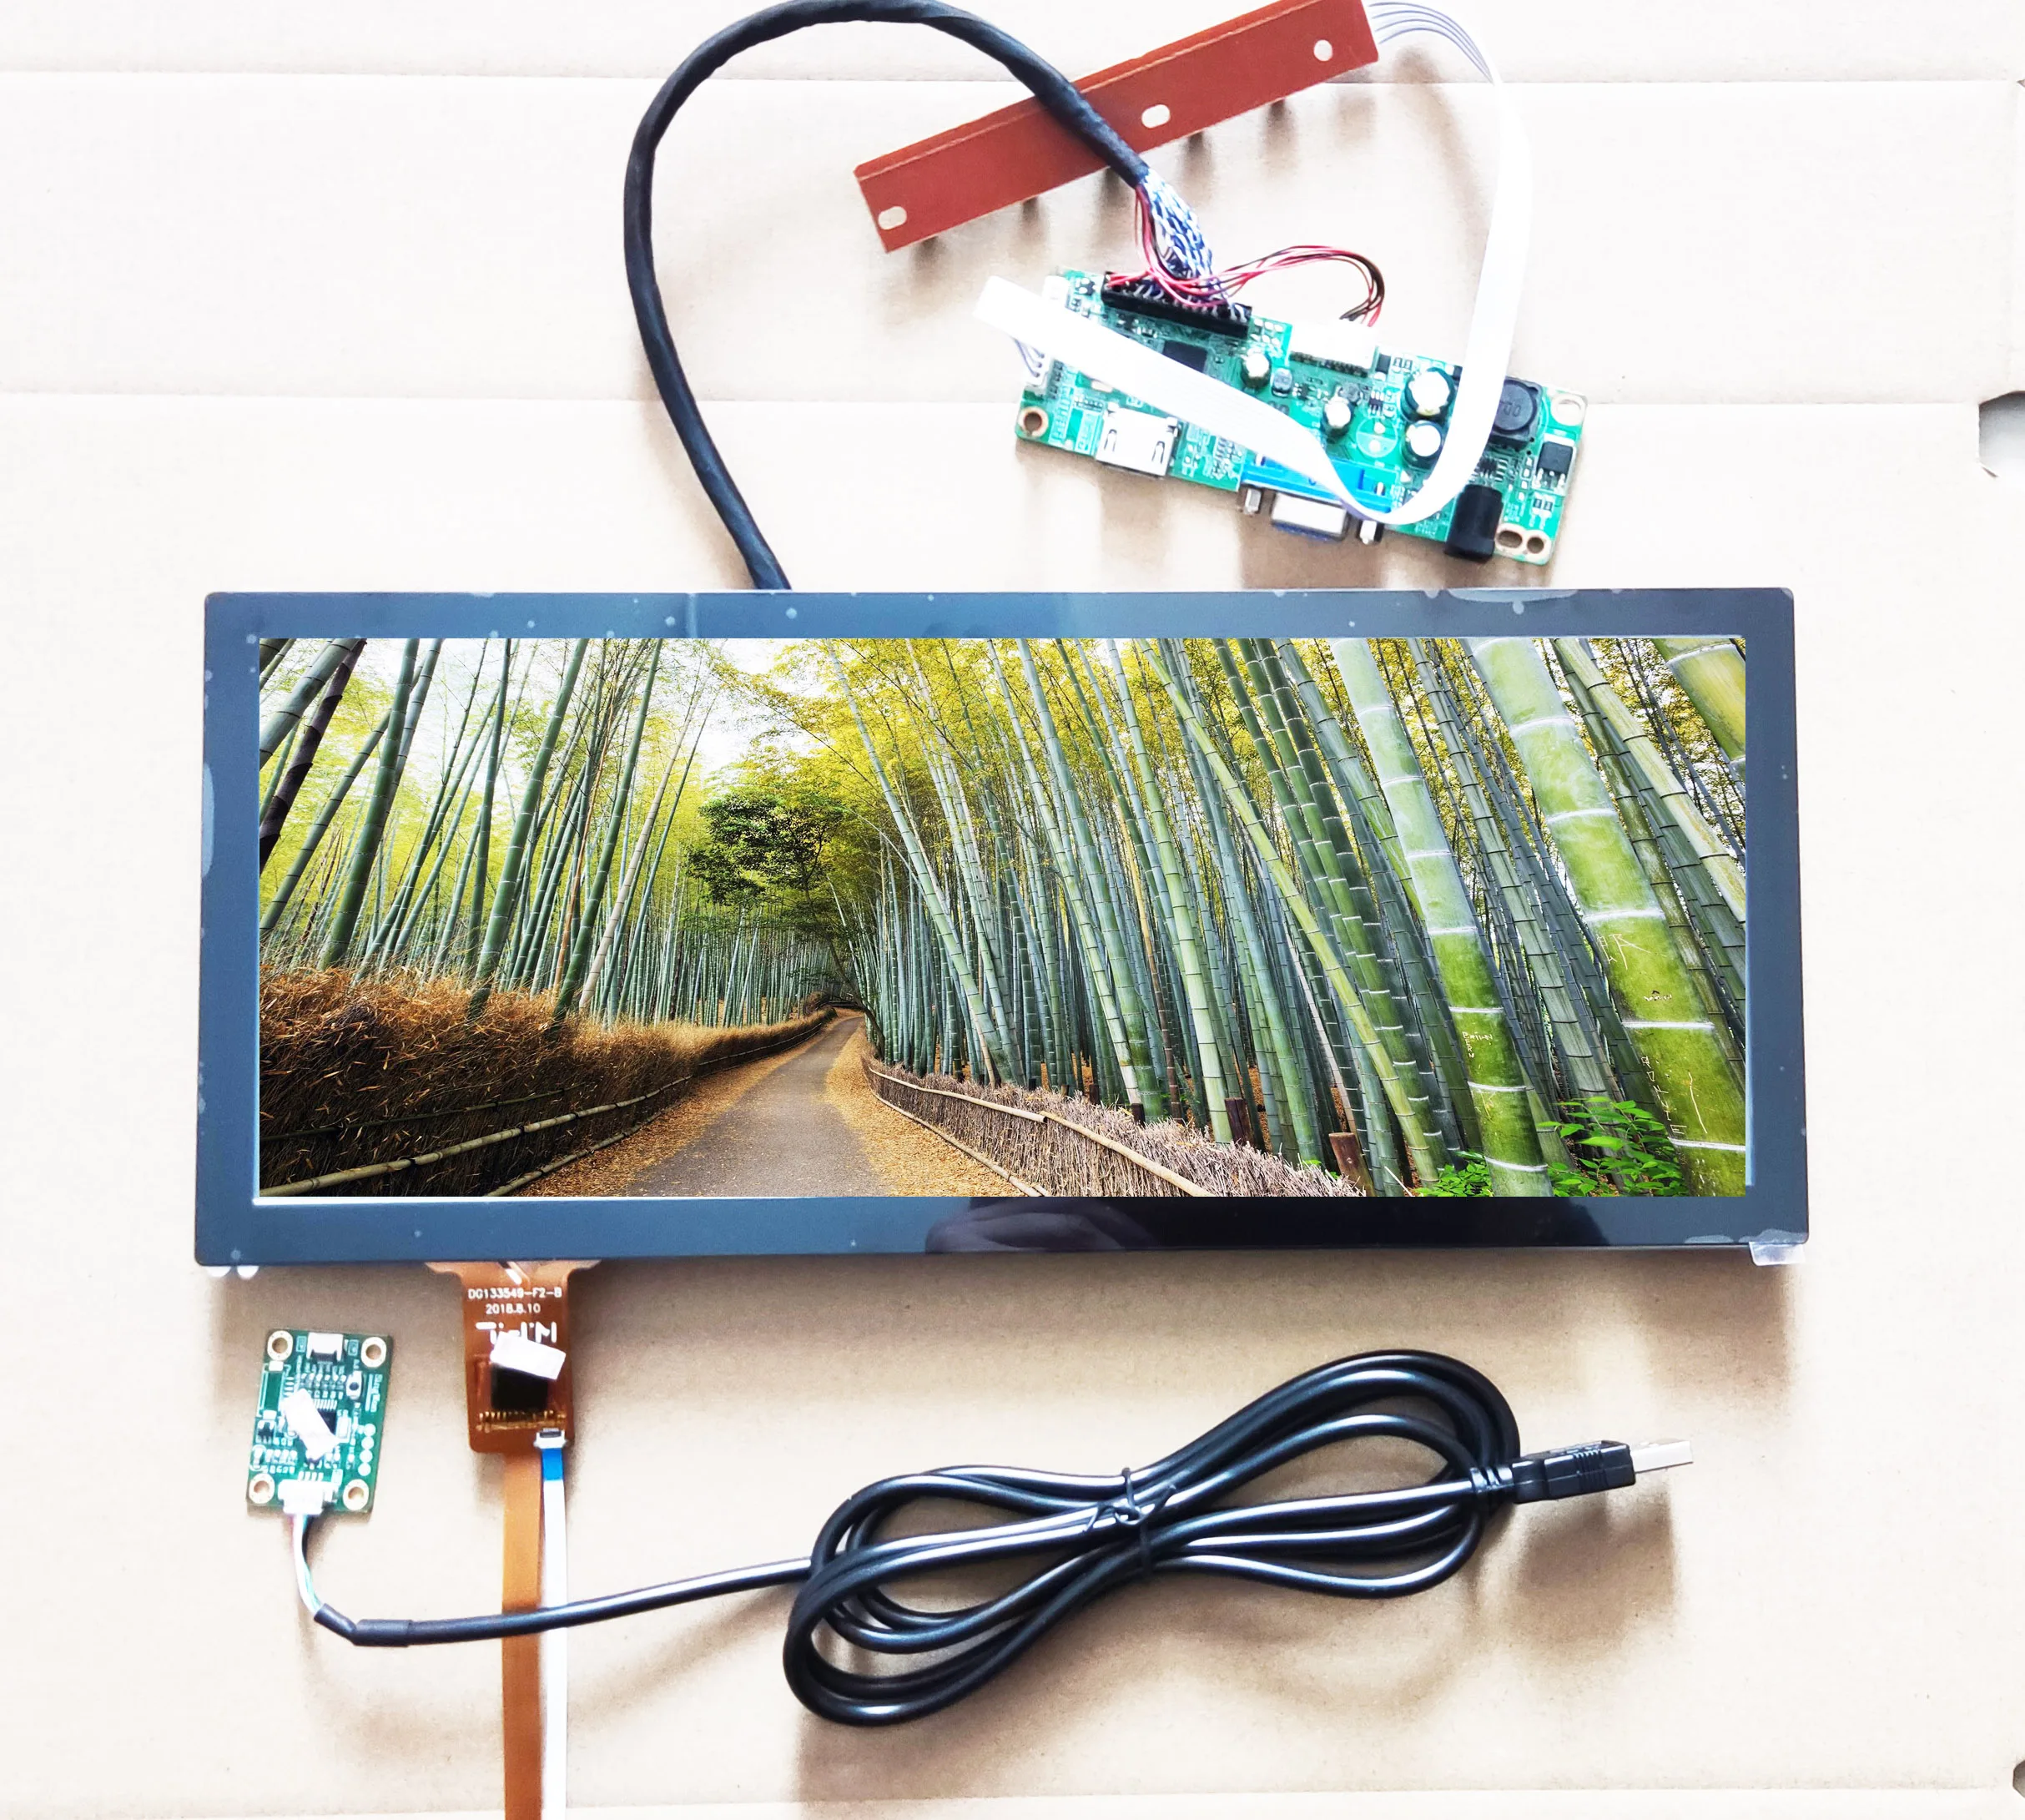 12.3 Inch Bar Lcd Kit 1920 * 720 Ips High Brightness With Mini Driver Board, Usb Capacitive Touch Screen Hsd123kpw2 - Tablet Lcds & Panels - AliExpress